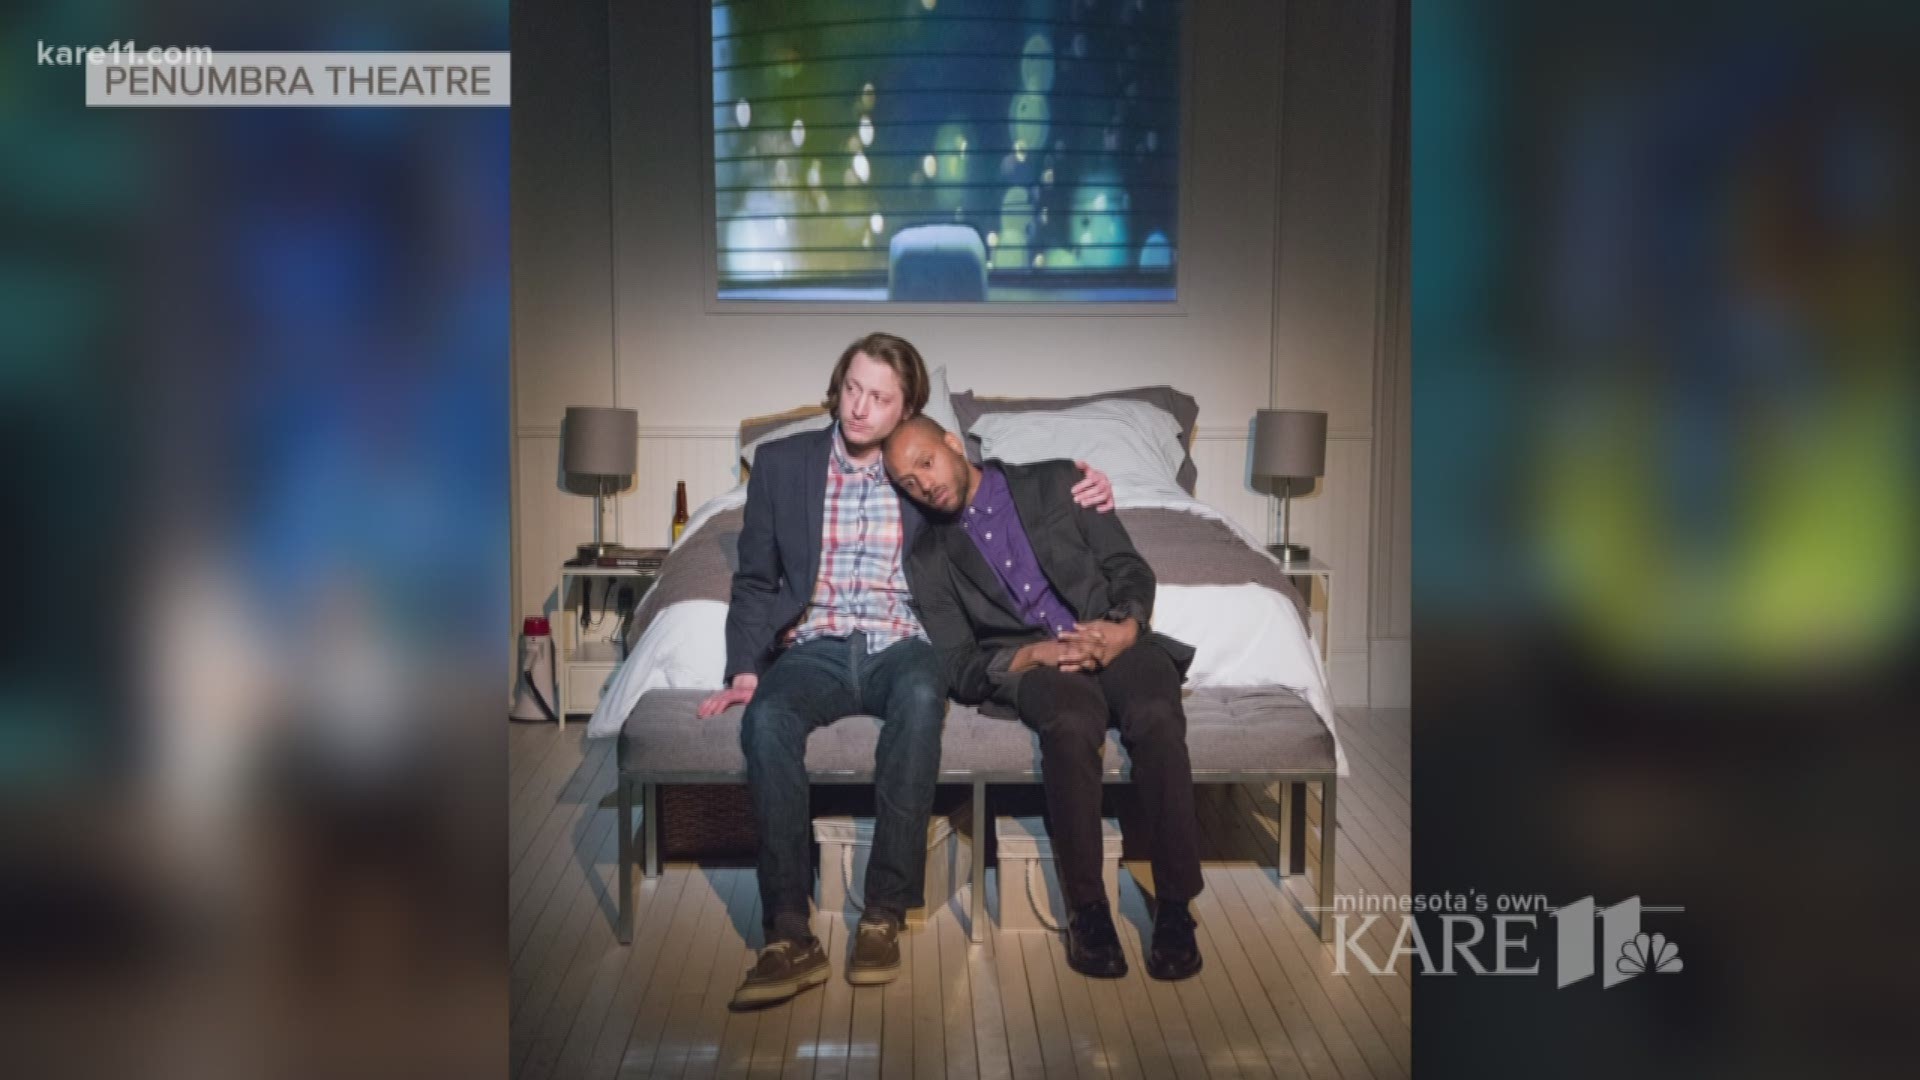 The director and playwright of "This Bitter Earth" stopped by KARE 11 at 4 p.m. to share more about the show, which is running now at the Penumbra Theatre in St. Paul. https://kare11.tv/2I1qOdT